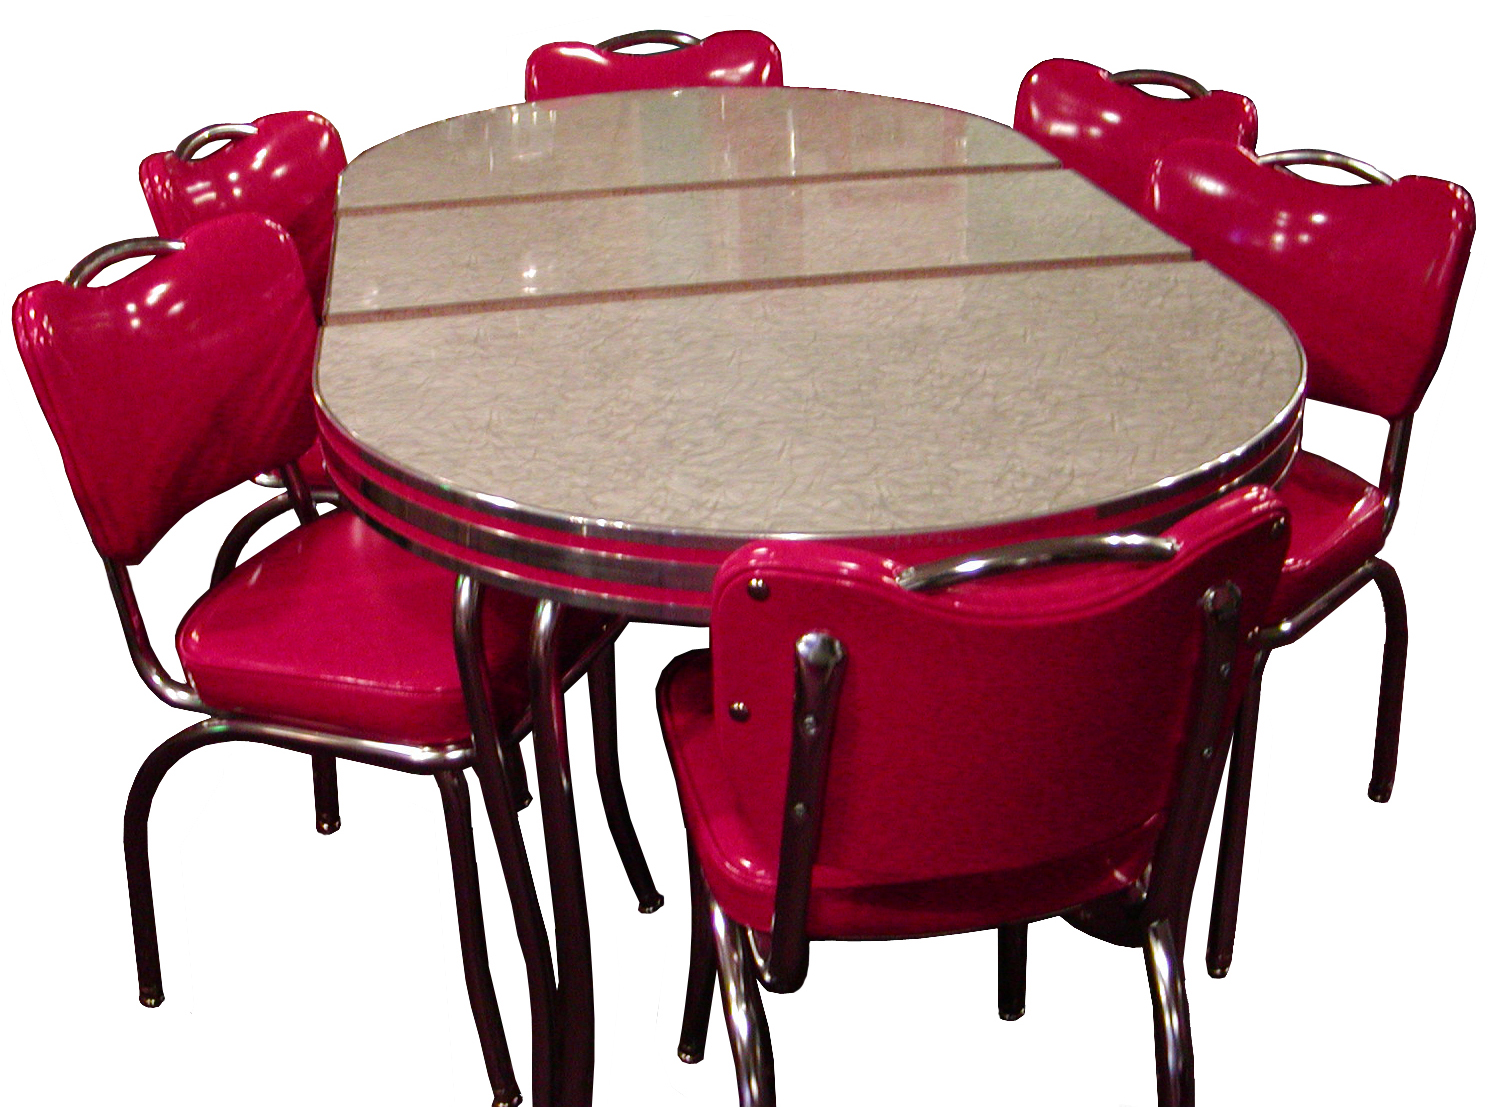 Red retro kitchen table chairs - When Red Become A ...